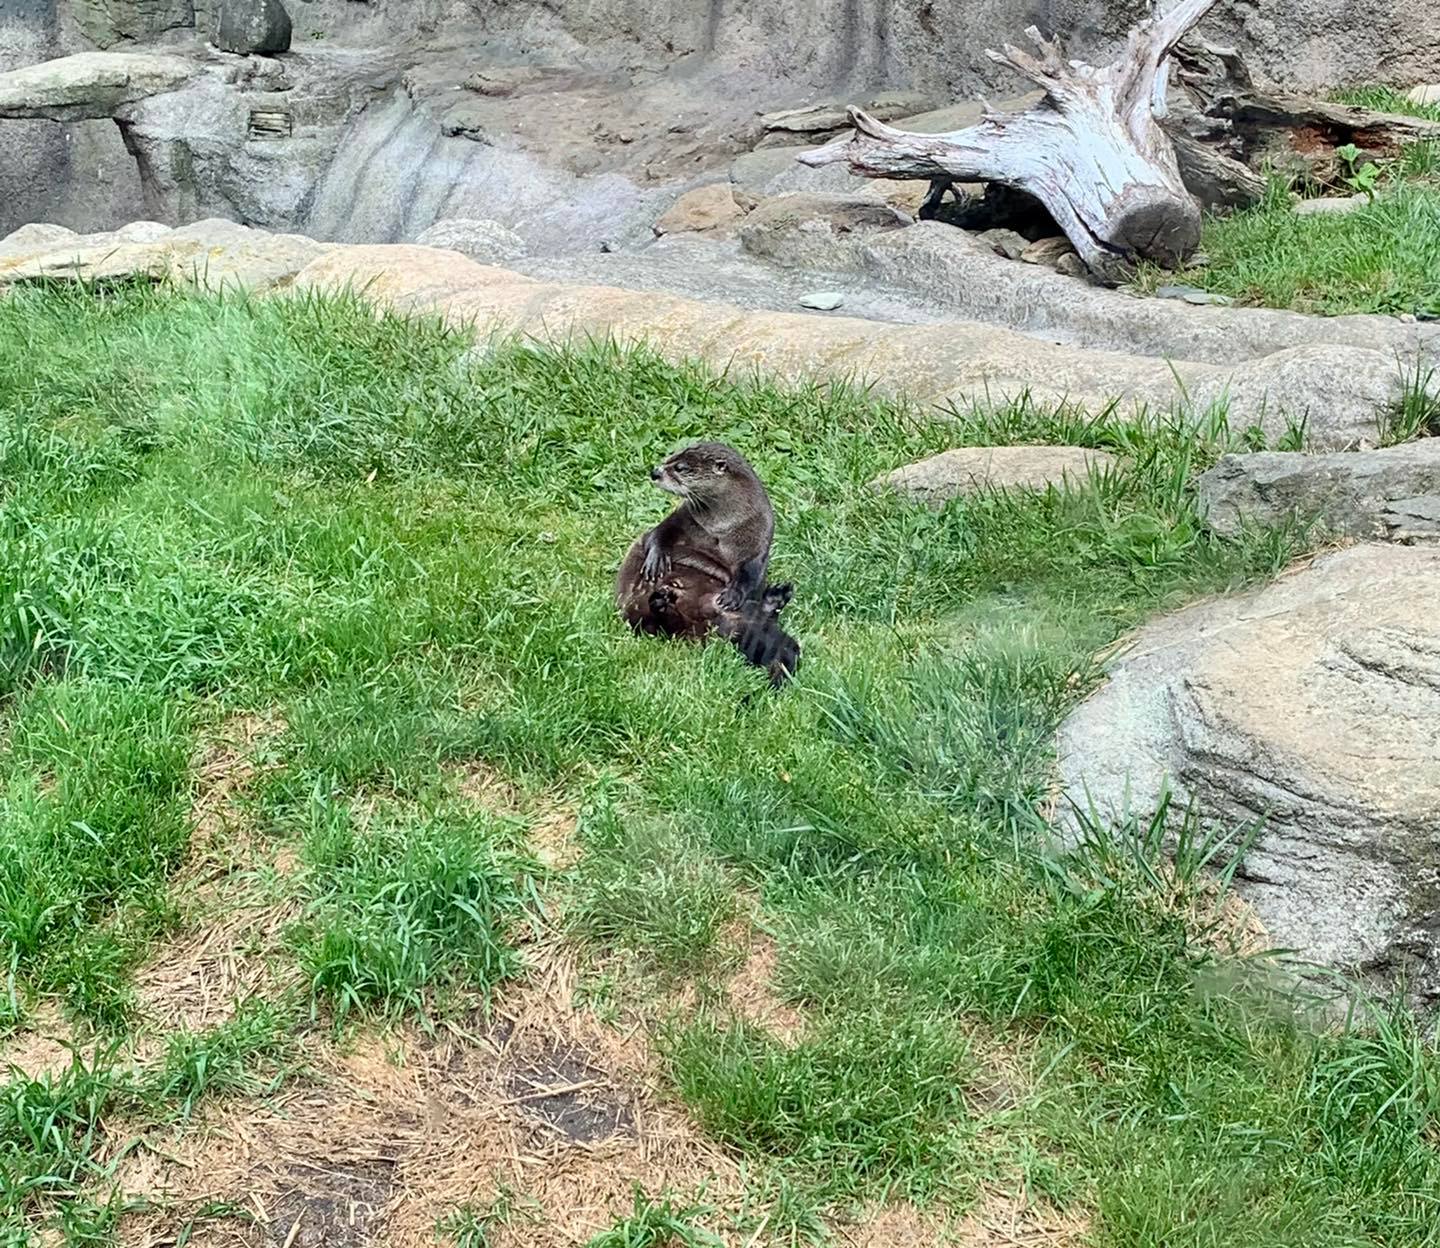 Who doesn't love a river otter?!